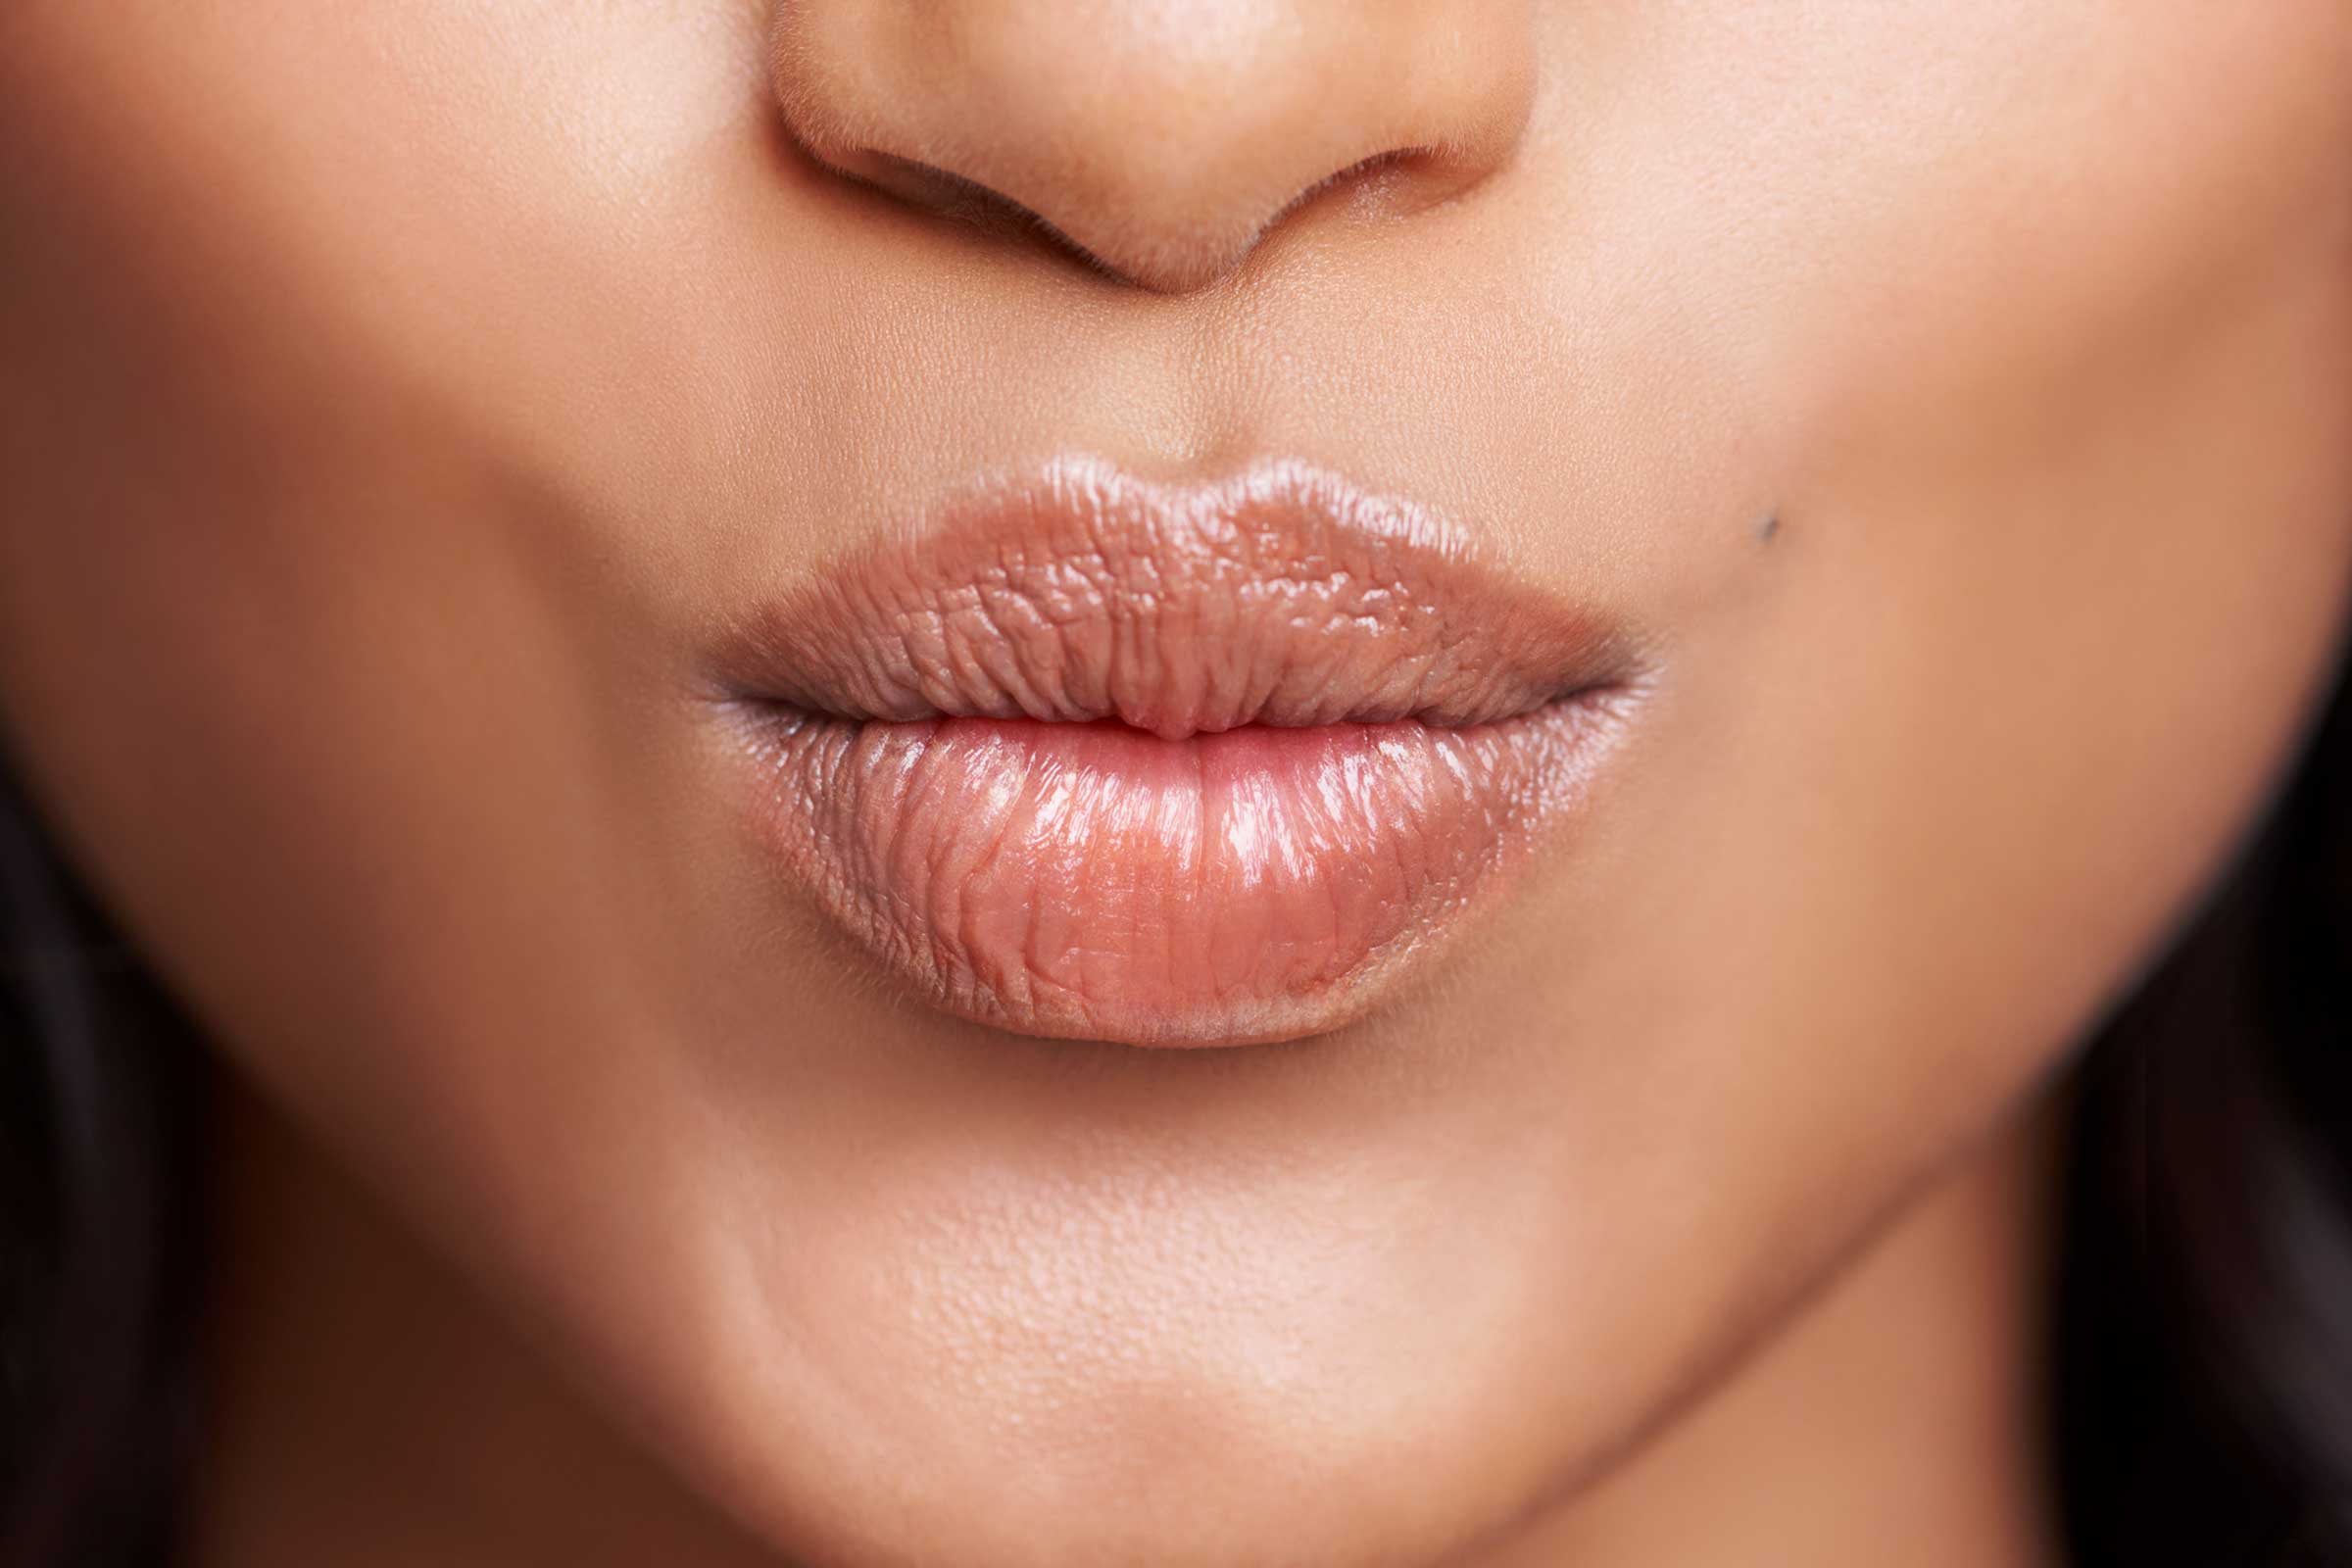 08-Amazing-Uses-of-Argan-Oil-For-Health-And-Beauty_lips_524861023_PeopleImages